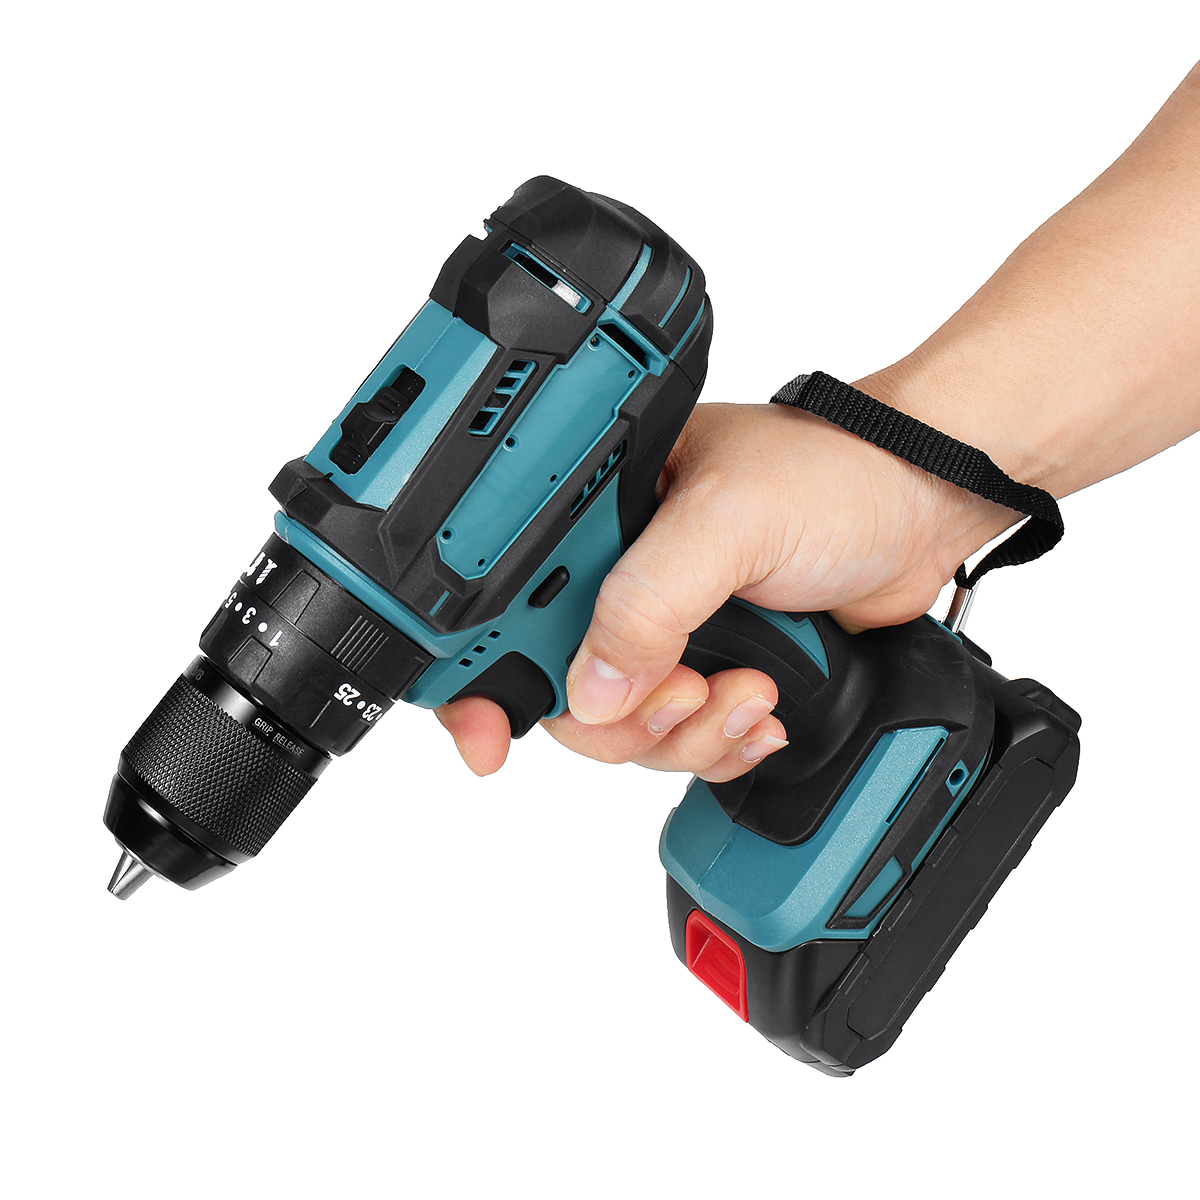 350Nm-4000-rpm-Electric-drill-3-In-1-Hammer-Flat-Drill-Screwdriver-Churn-Drill-with-Battery-1955074-22